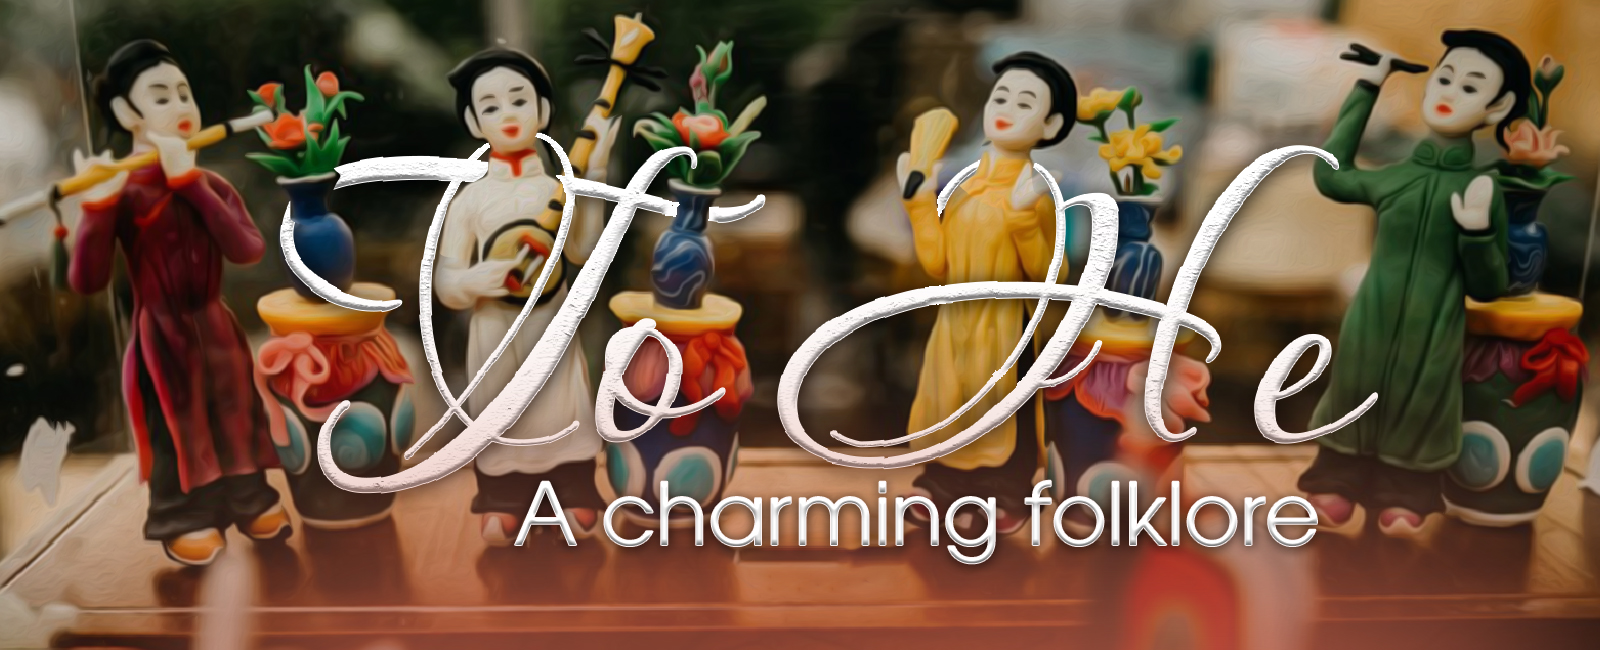 To he - A charming folklore